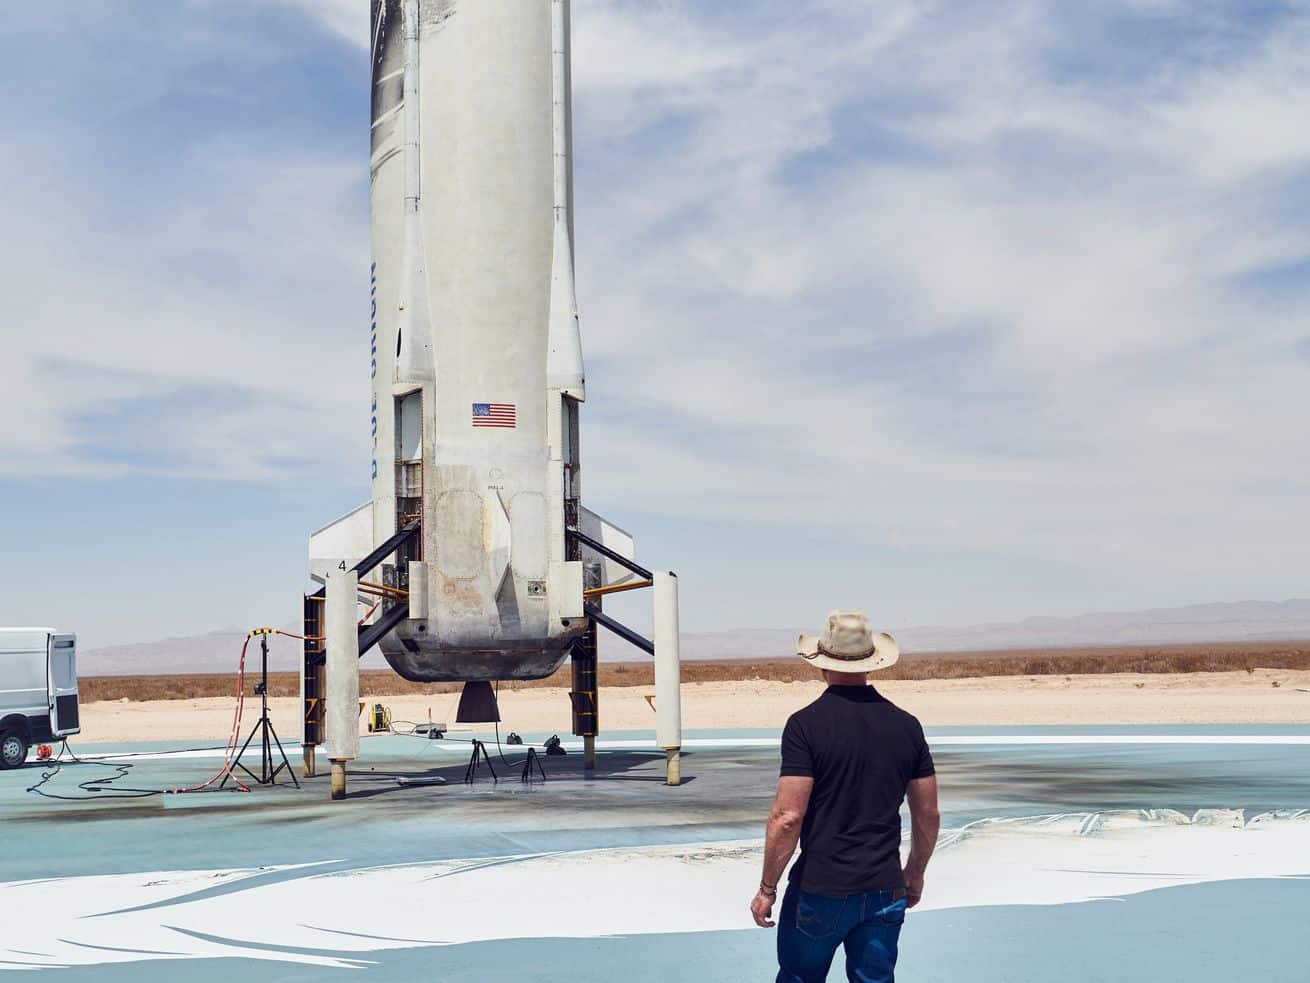 Welcome to the age of billionaire joy rides to space